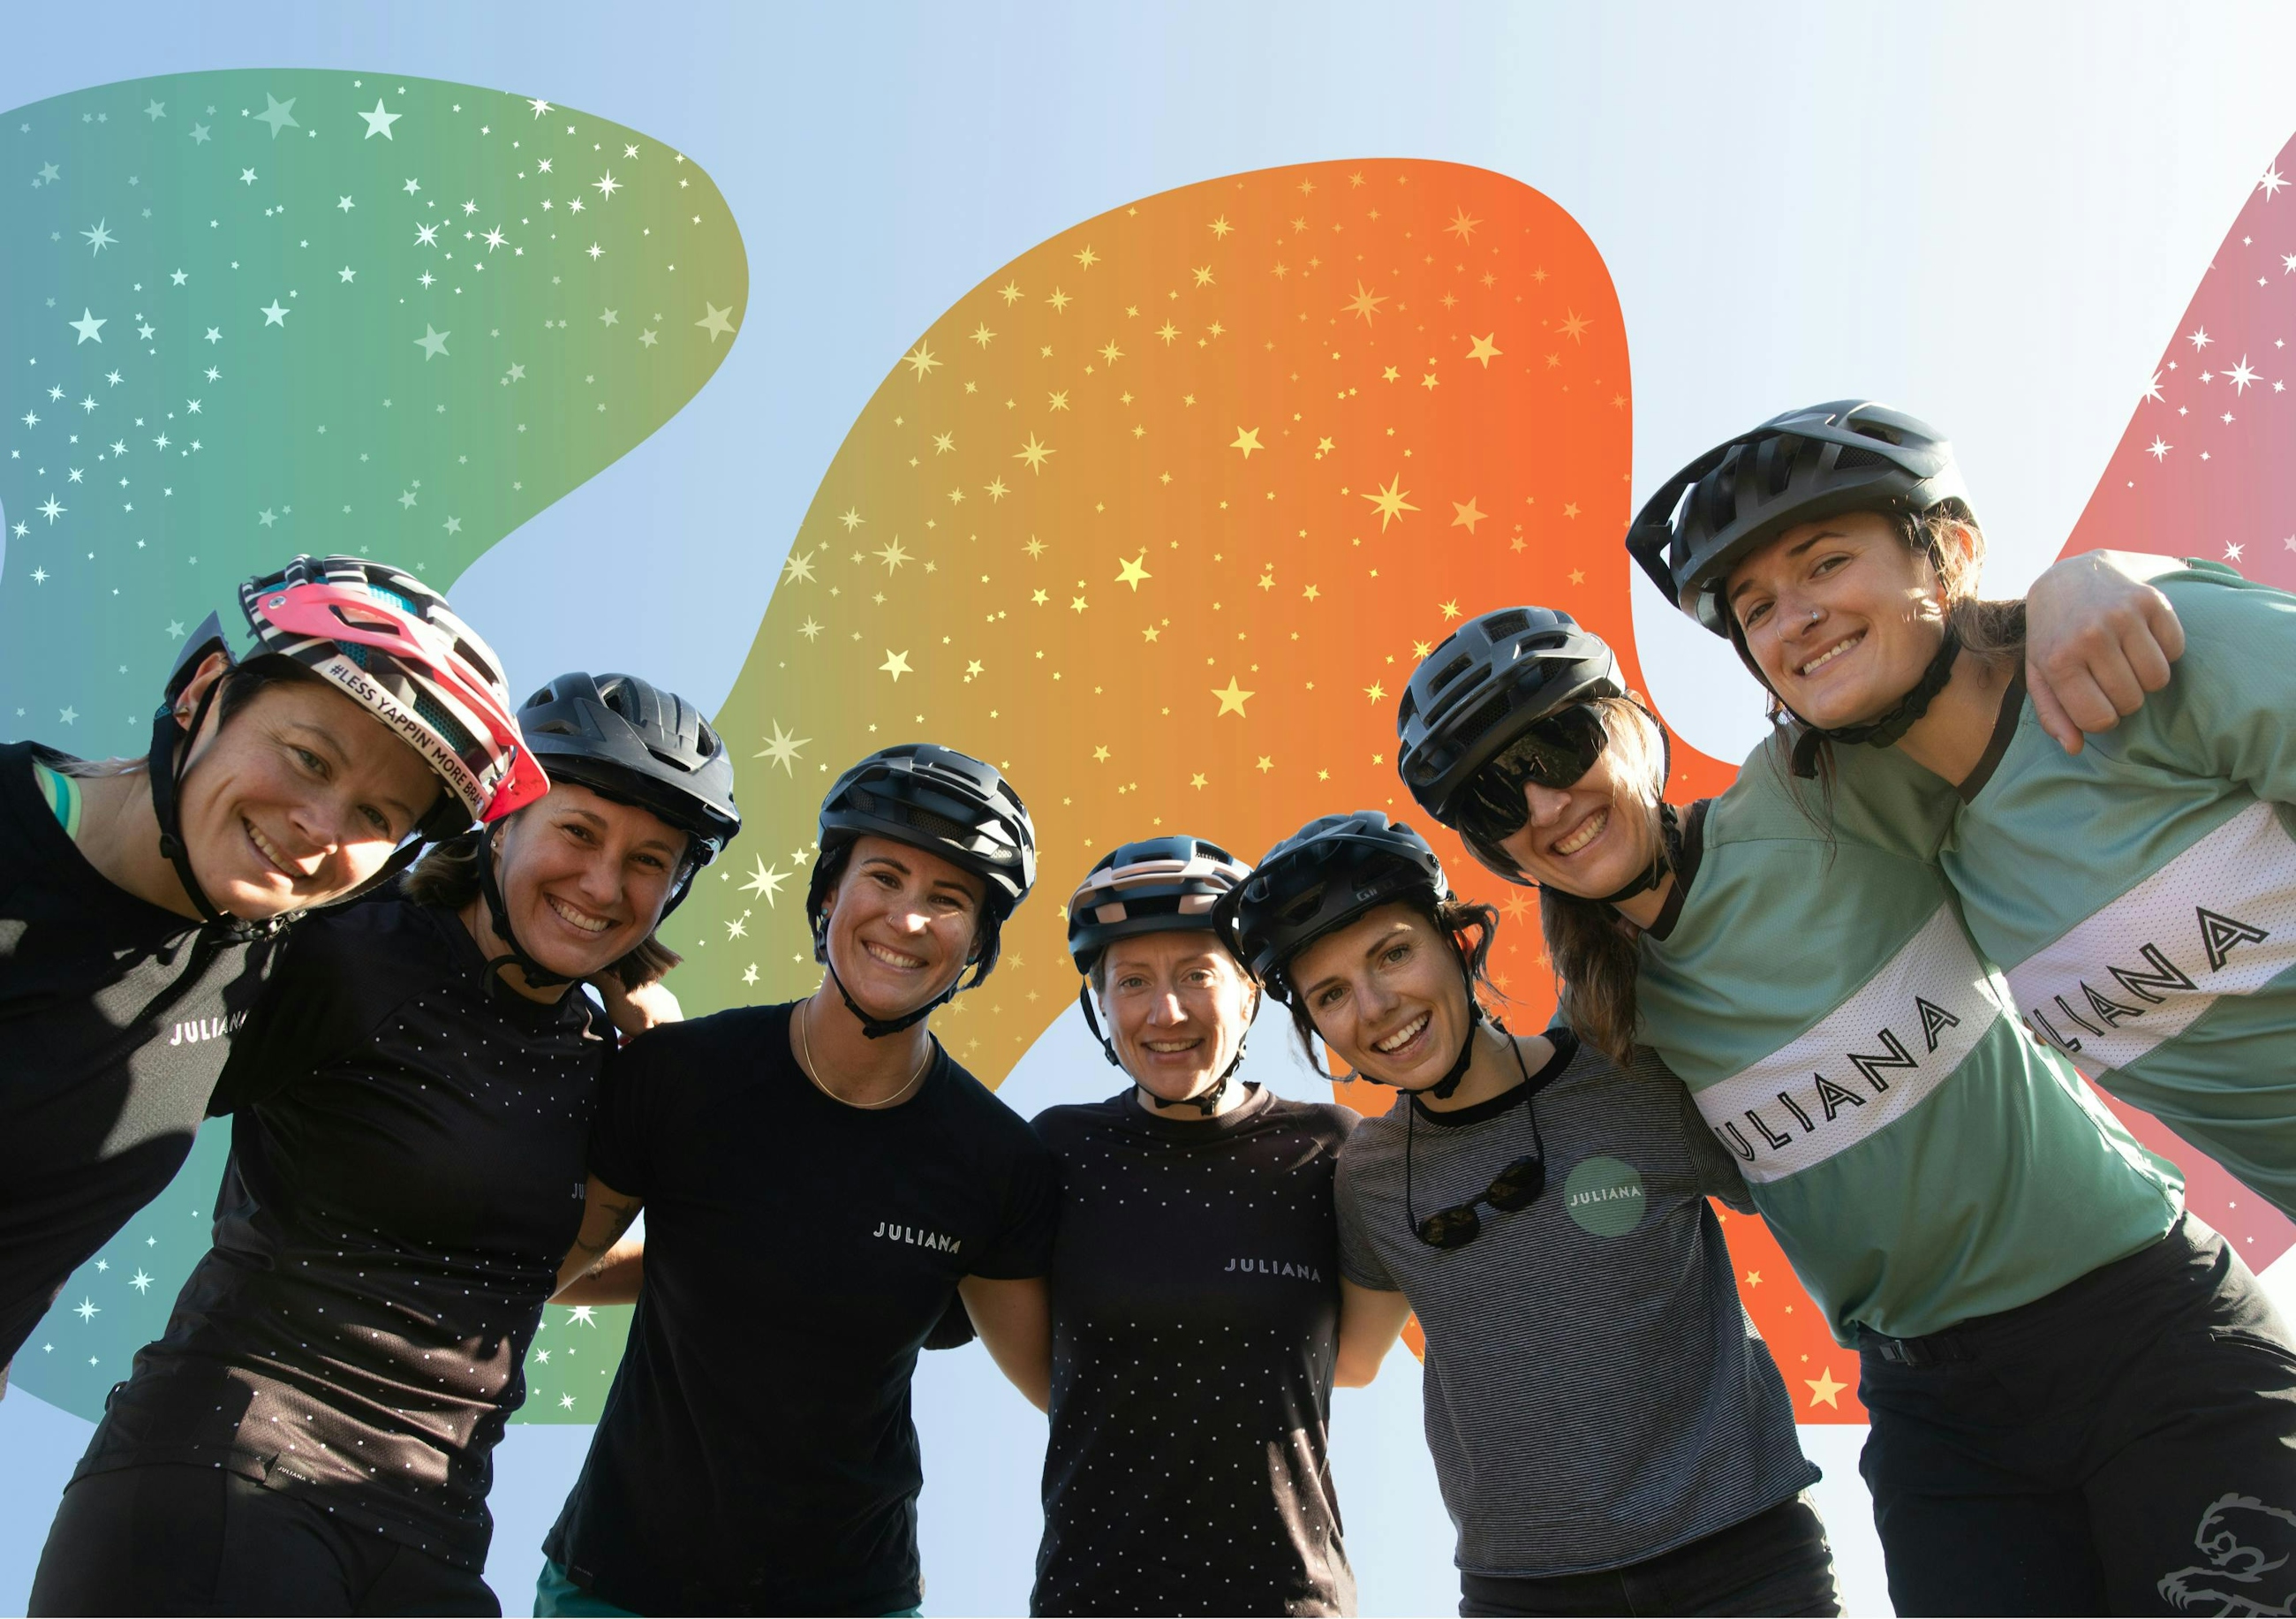 Juliana Bicycles Employees and Athletes posing together